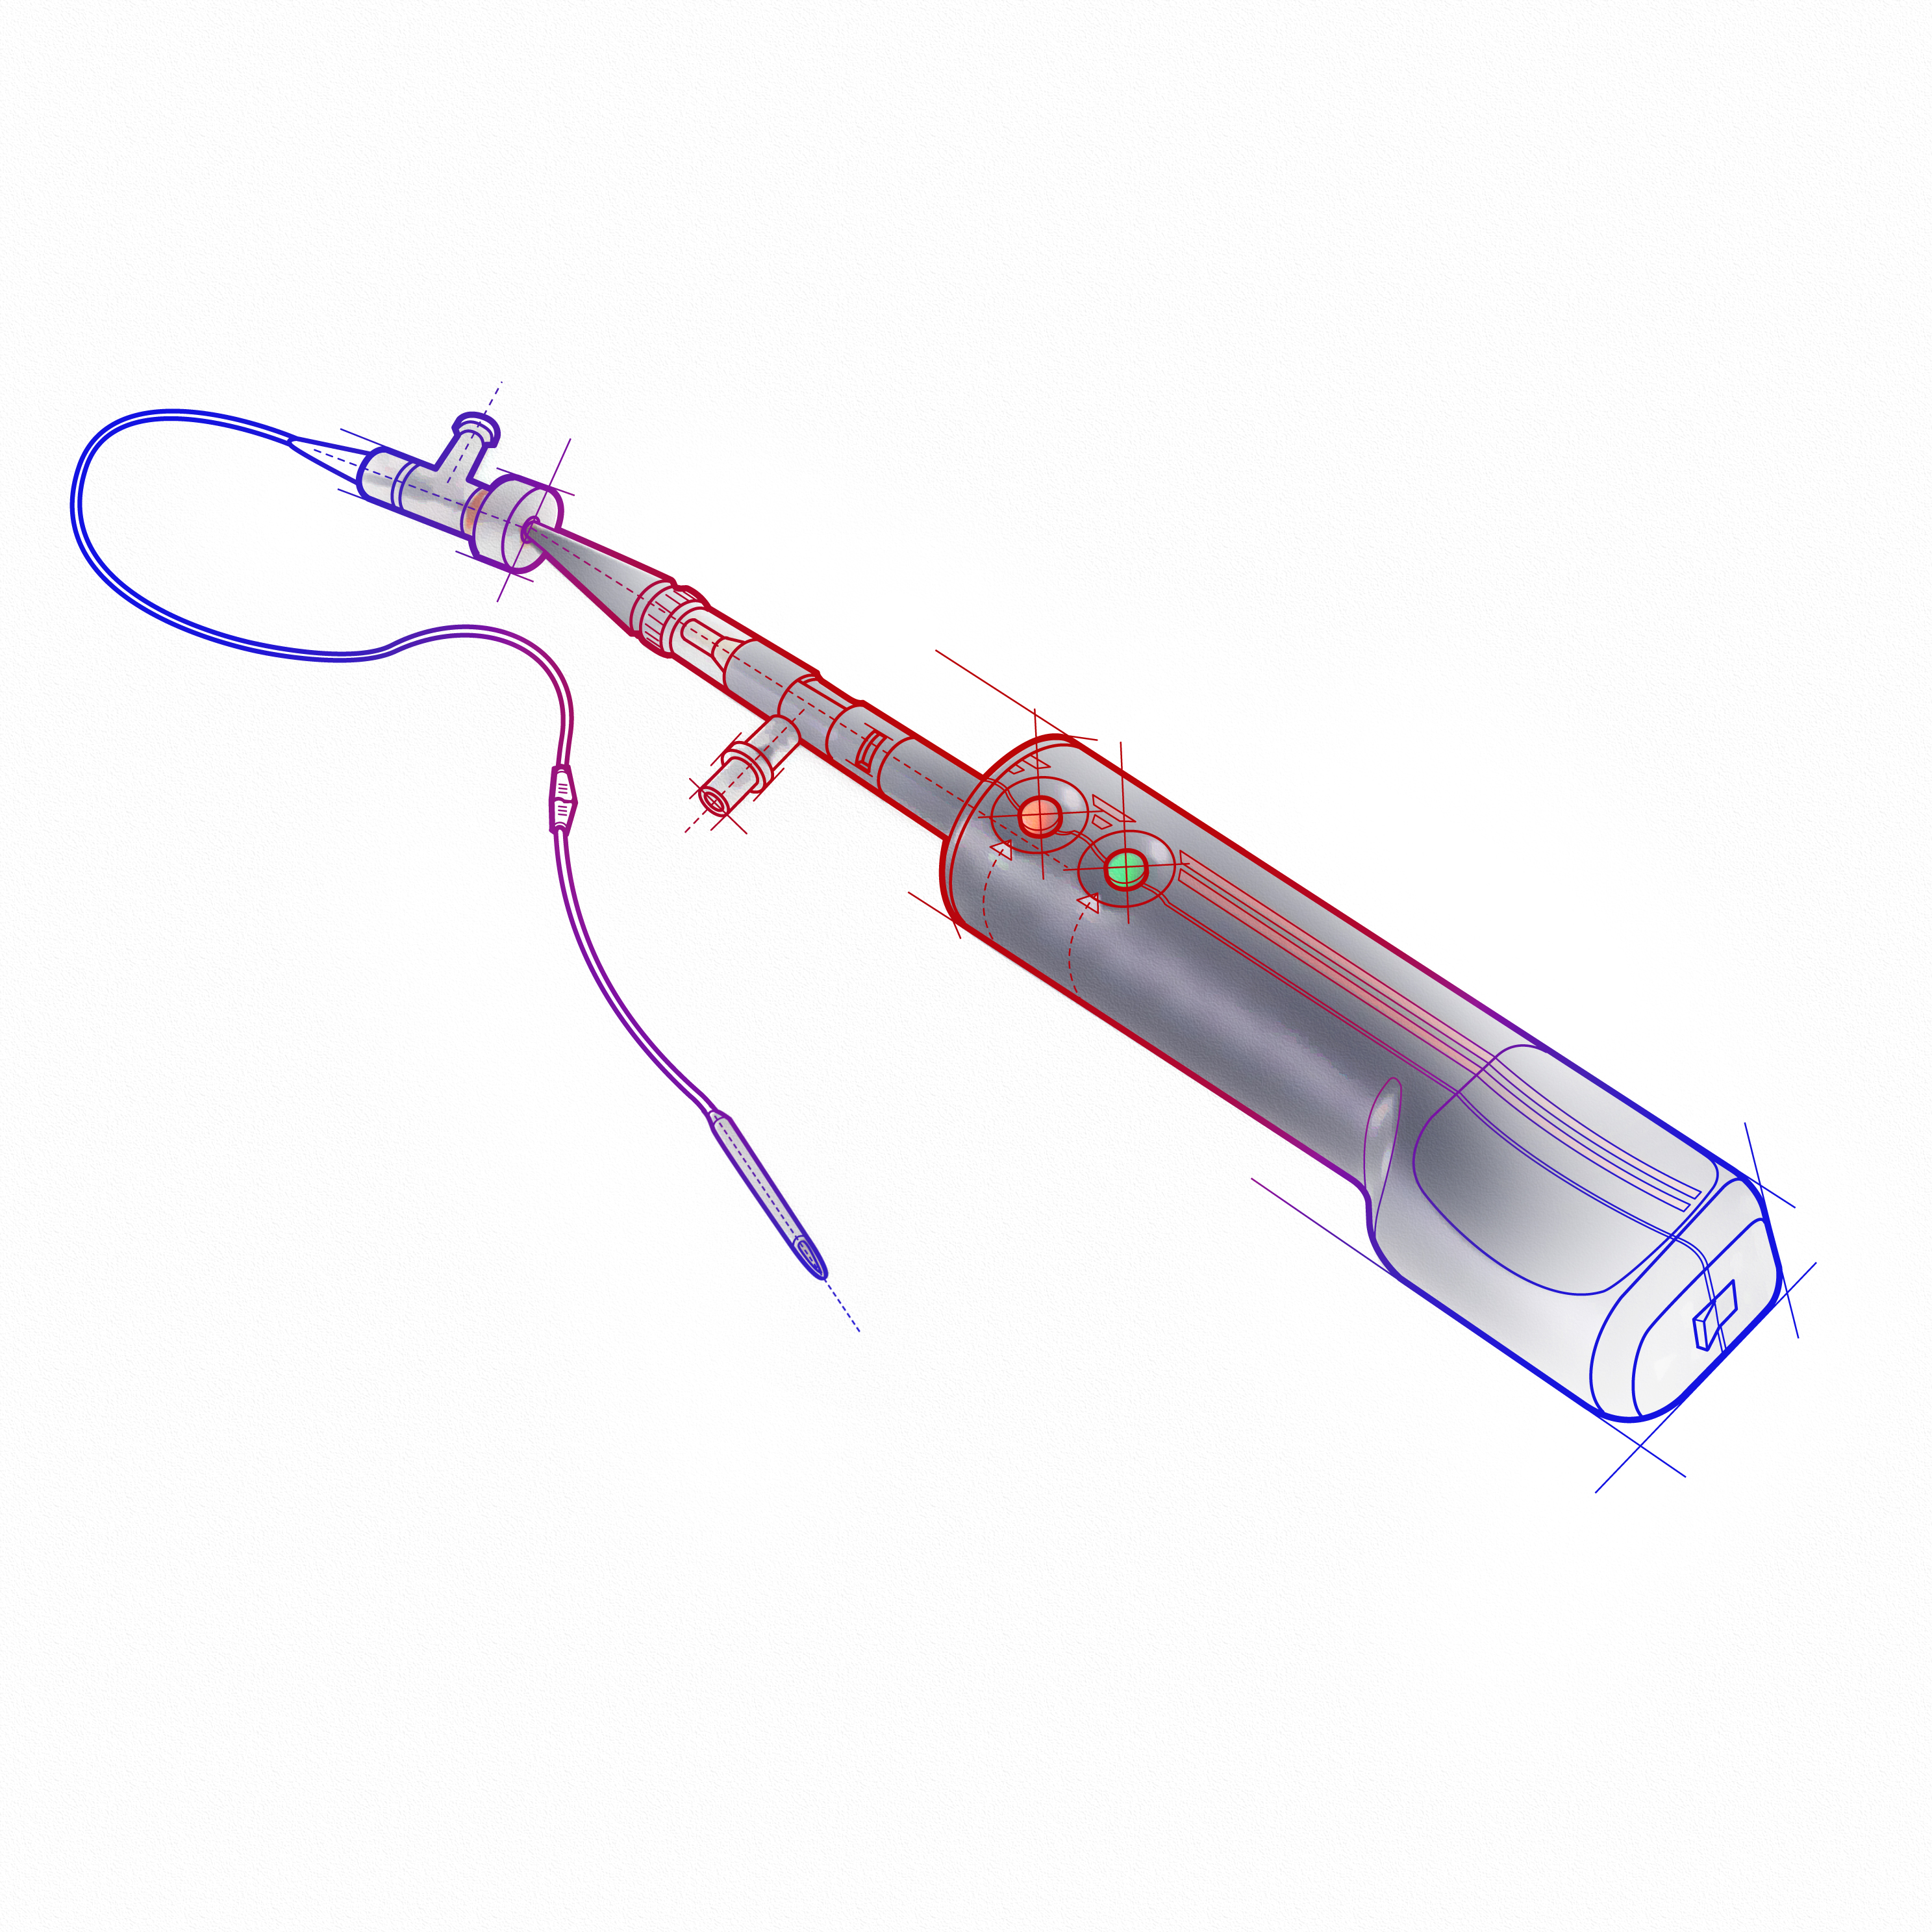 Artery disease treatment devices rely on the controlled rotation of an electric motor of a compact size.